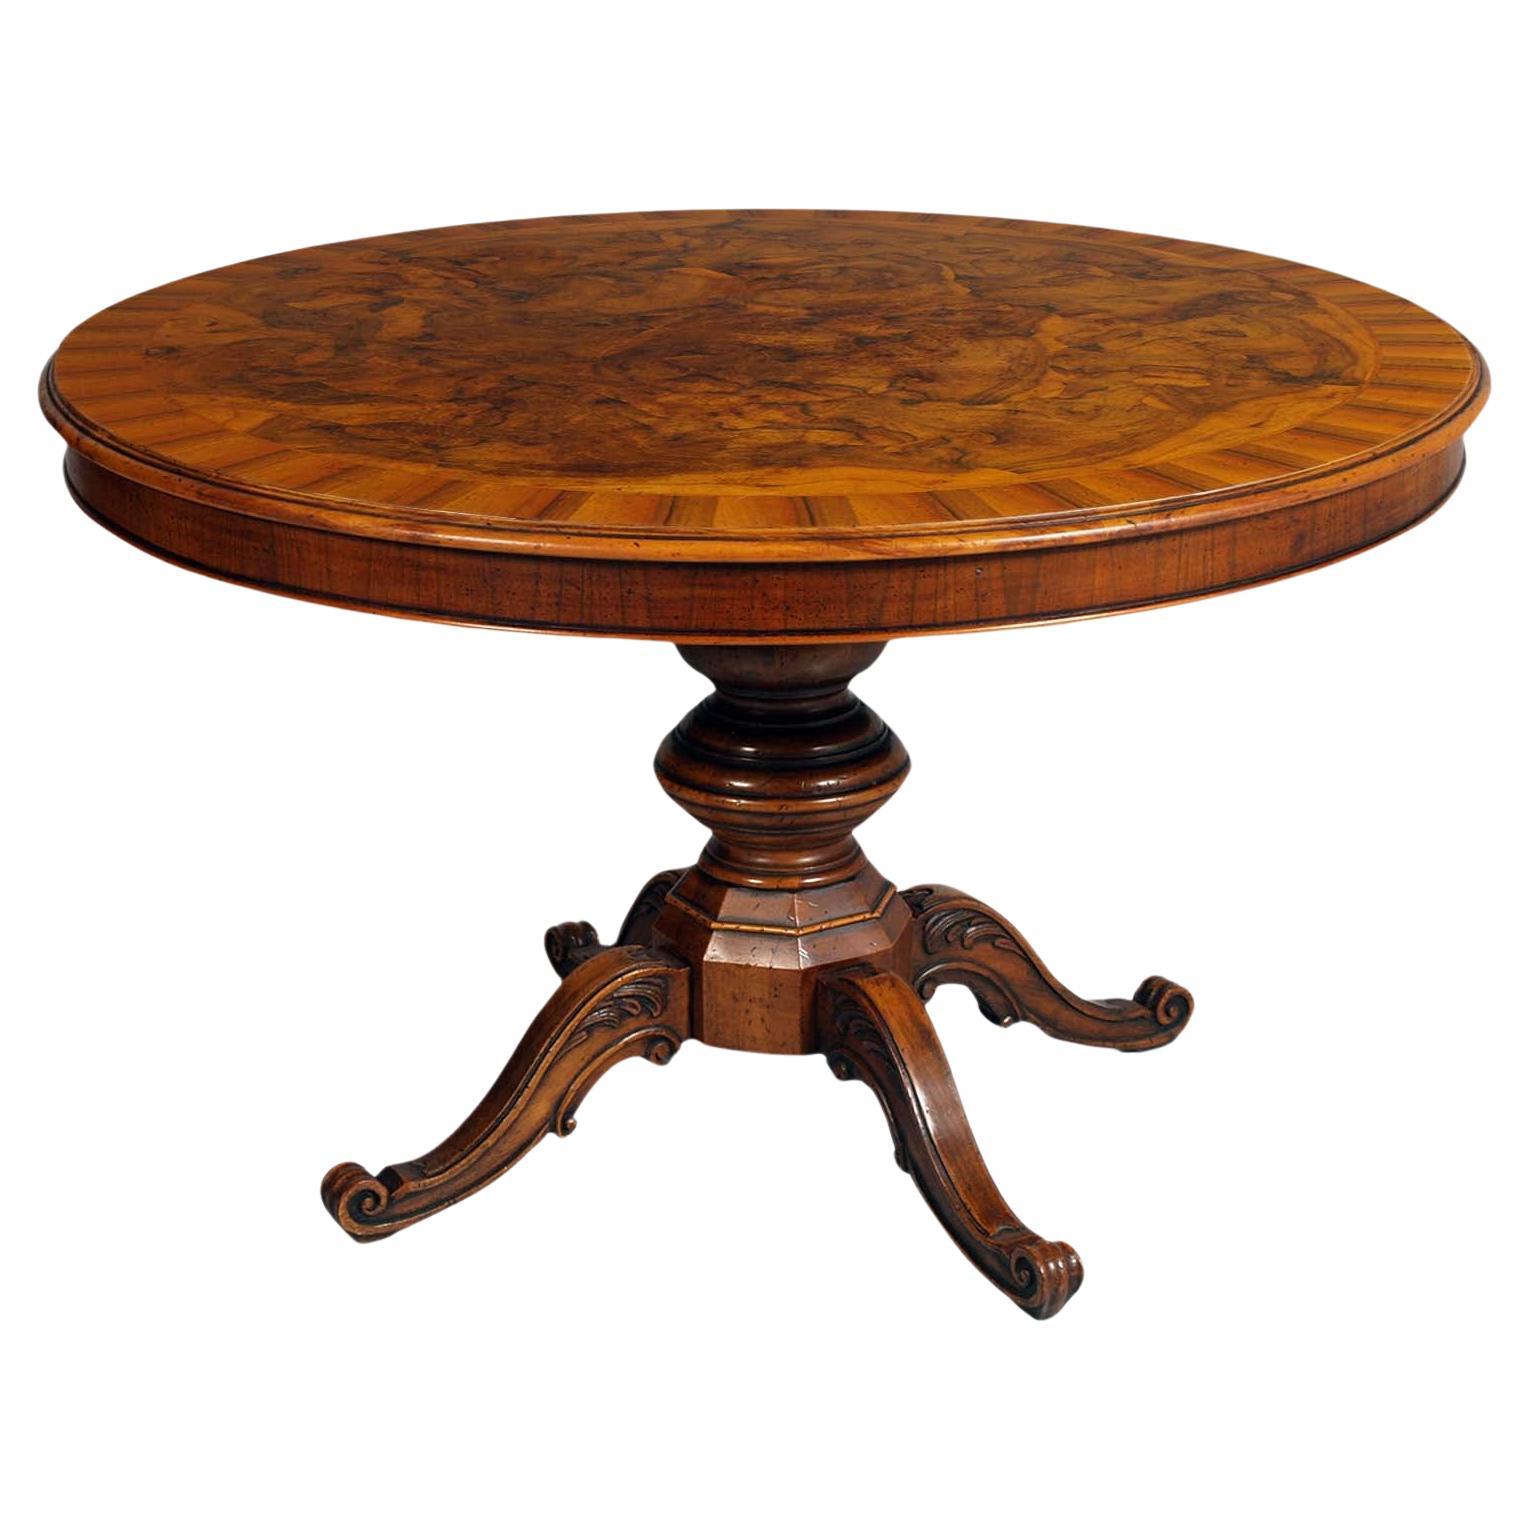  Round Baroque Table Mid 1900s Top in Ferrarese Walnut Root and Central Inlay For Sale